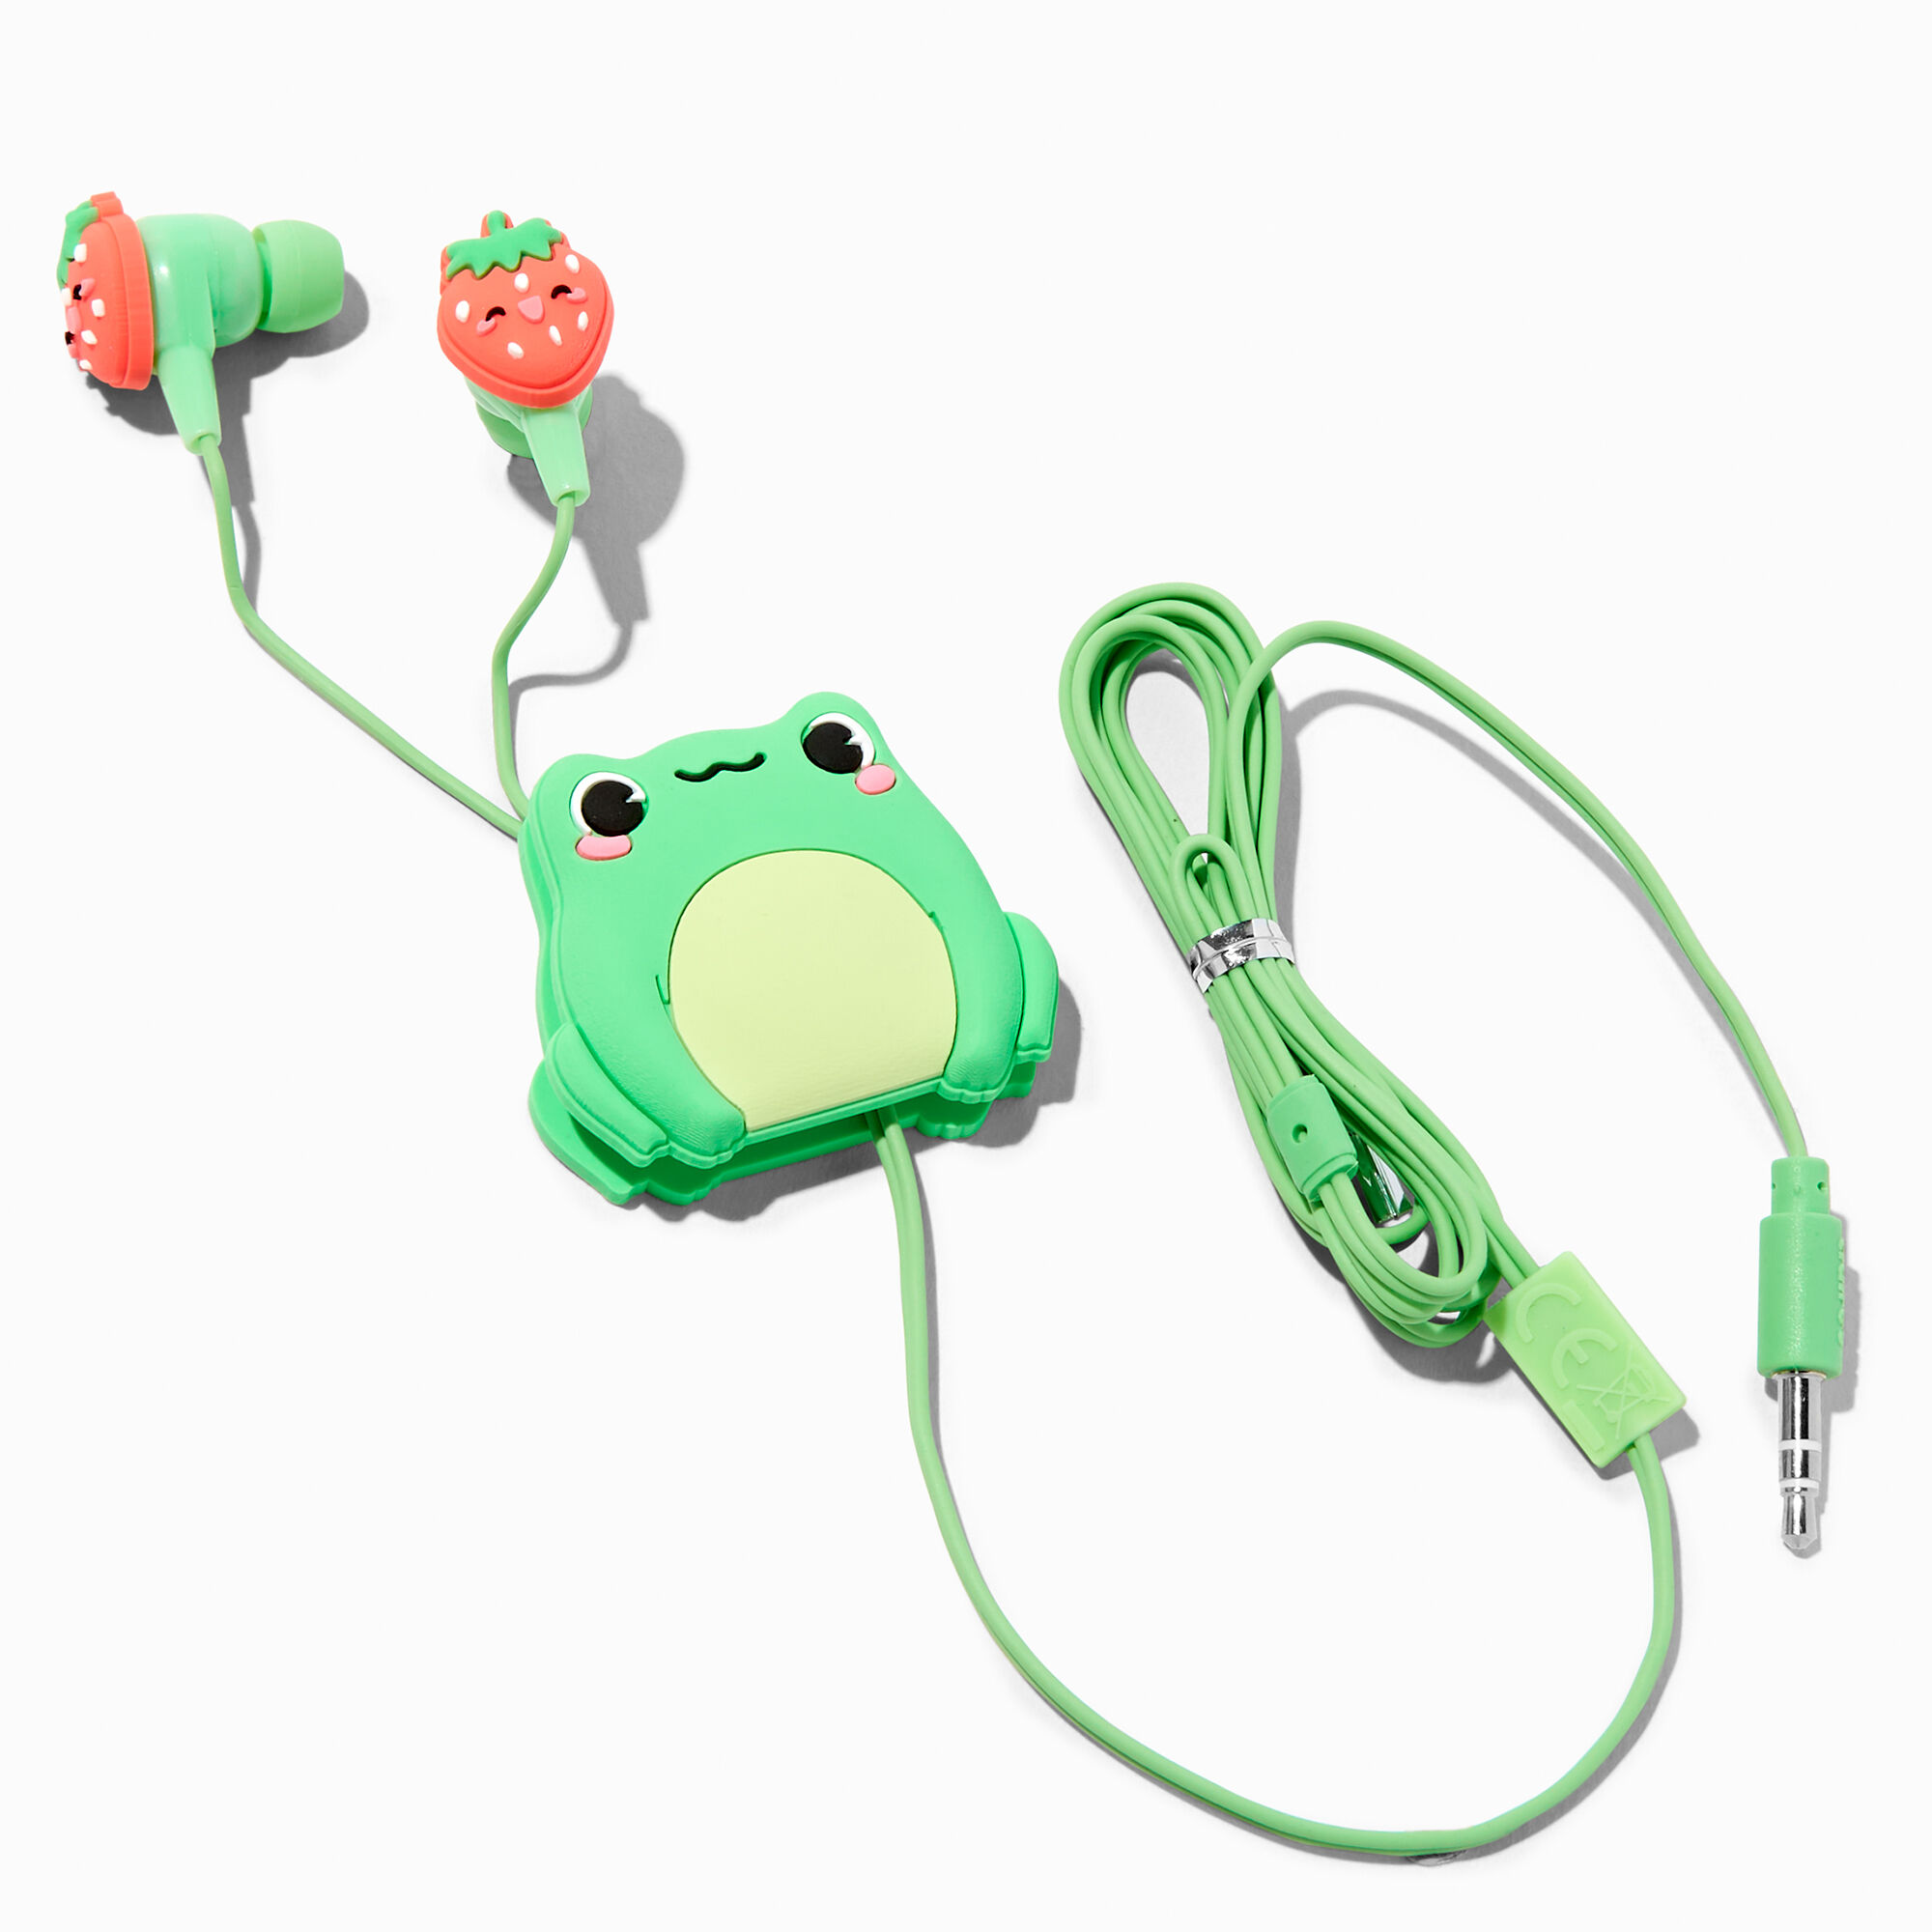 View Claires Frog Strawberries Silicone Earbuds information